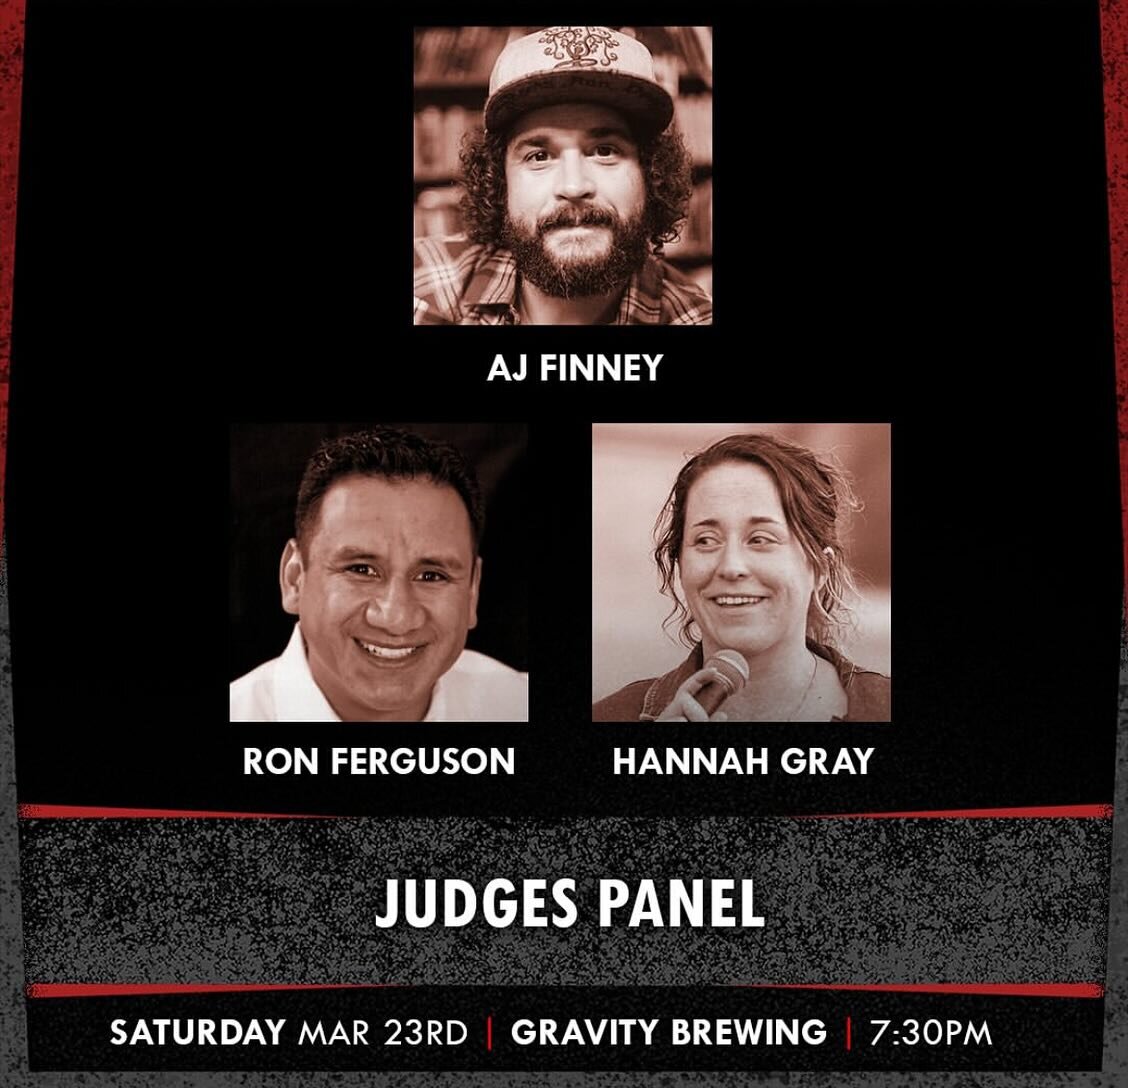 Excited to be on the judges panel tonight for roast battle at The Front Range Funny Festival! 7:30 tonight at Gravity Brewing! 🤙🏼 
.
.
.
.
.
.
#comedy #festival #roast #tonight #funny #instagood #photooftheday #letsgo #lol #colorado